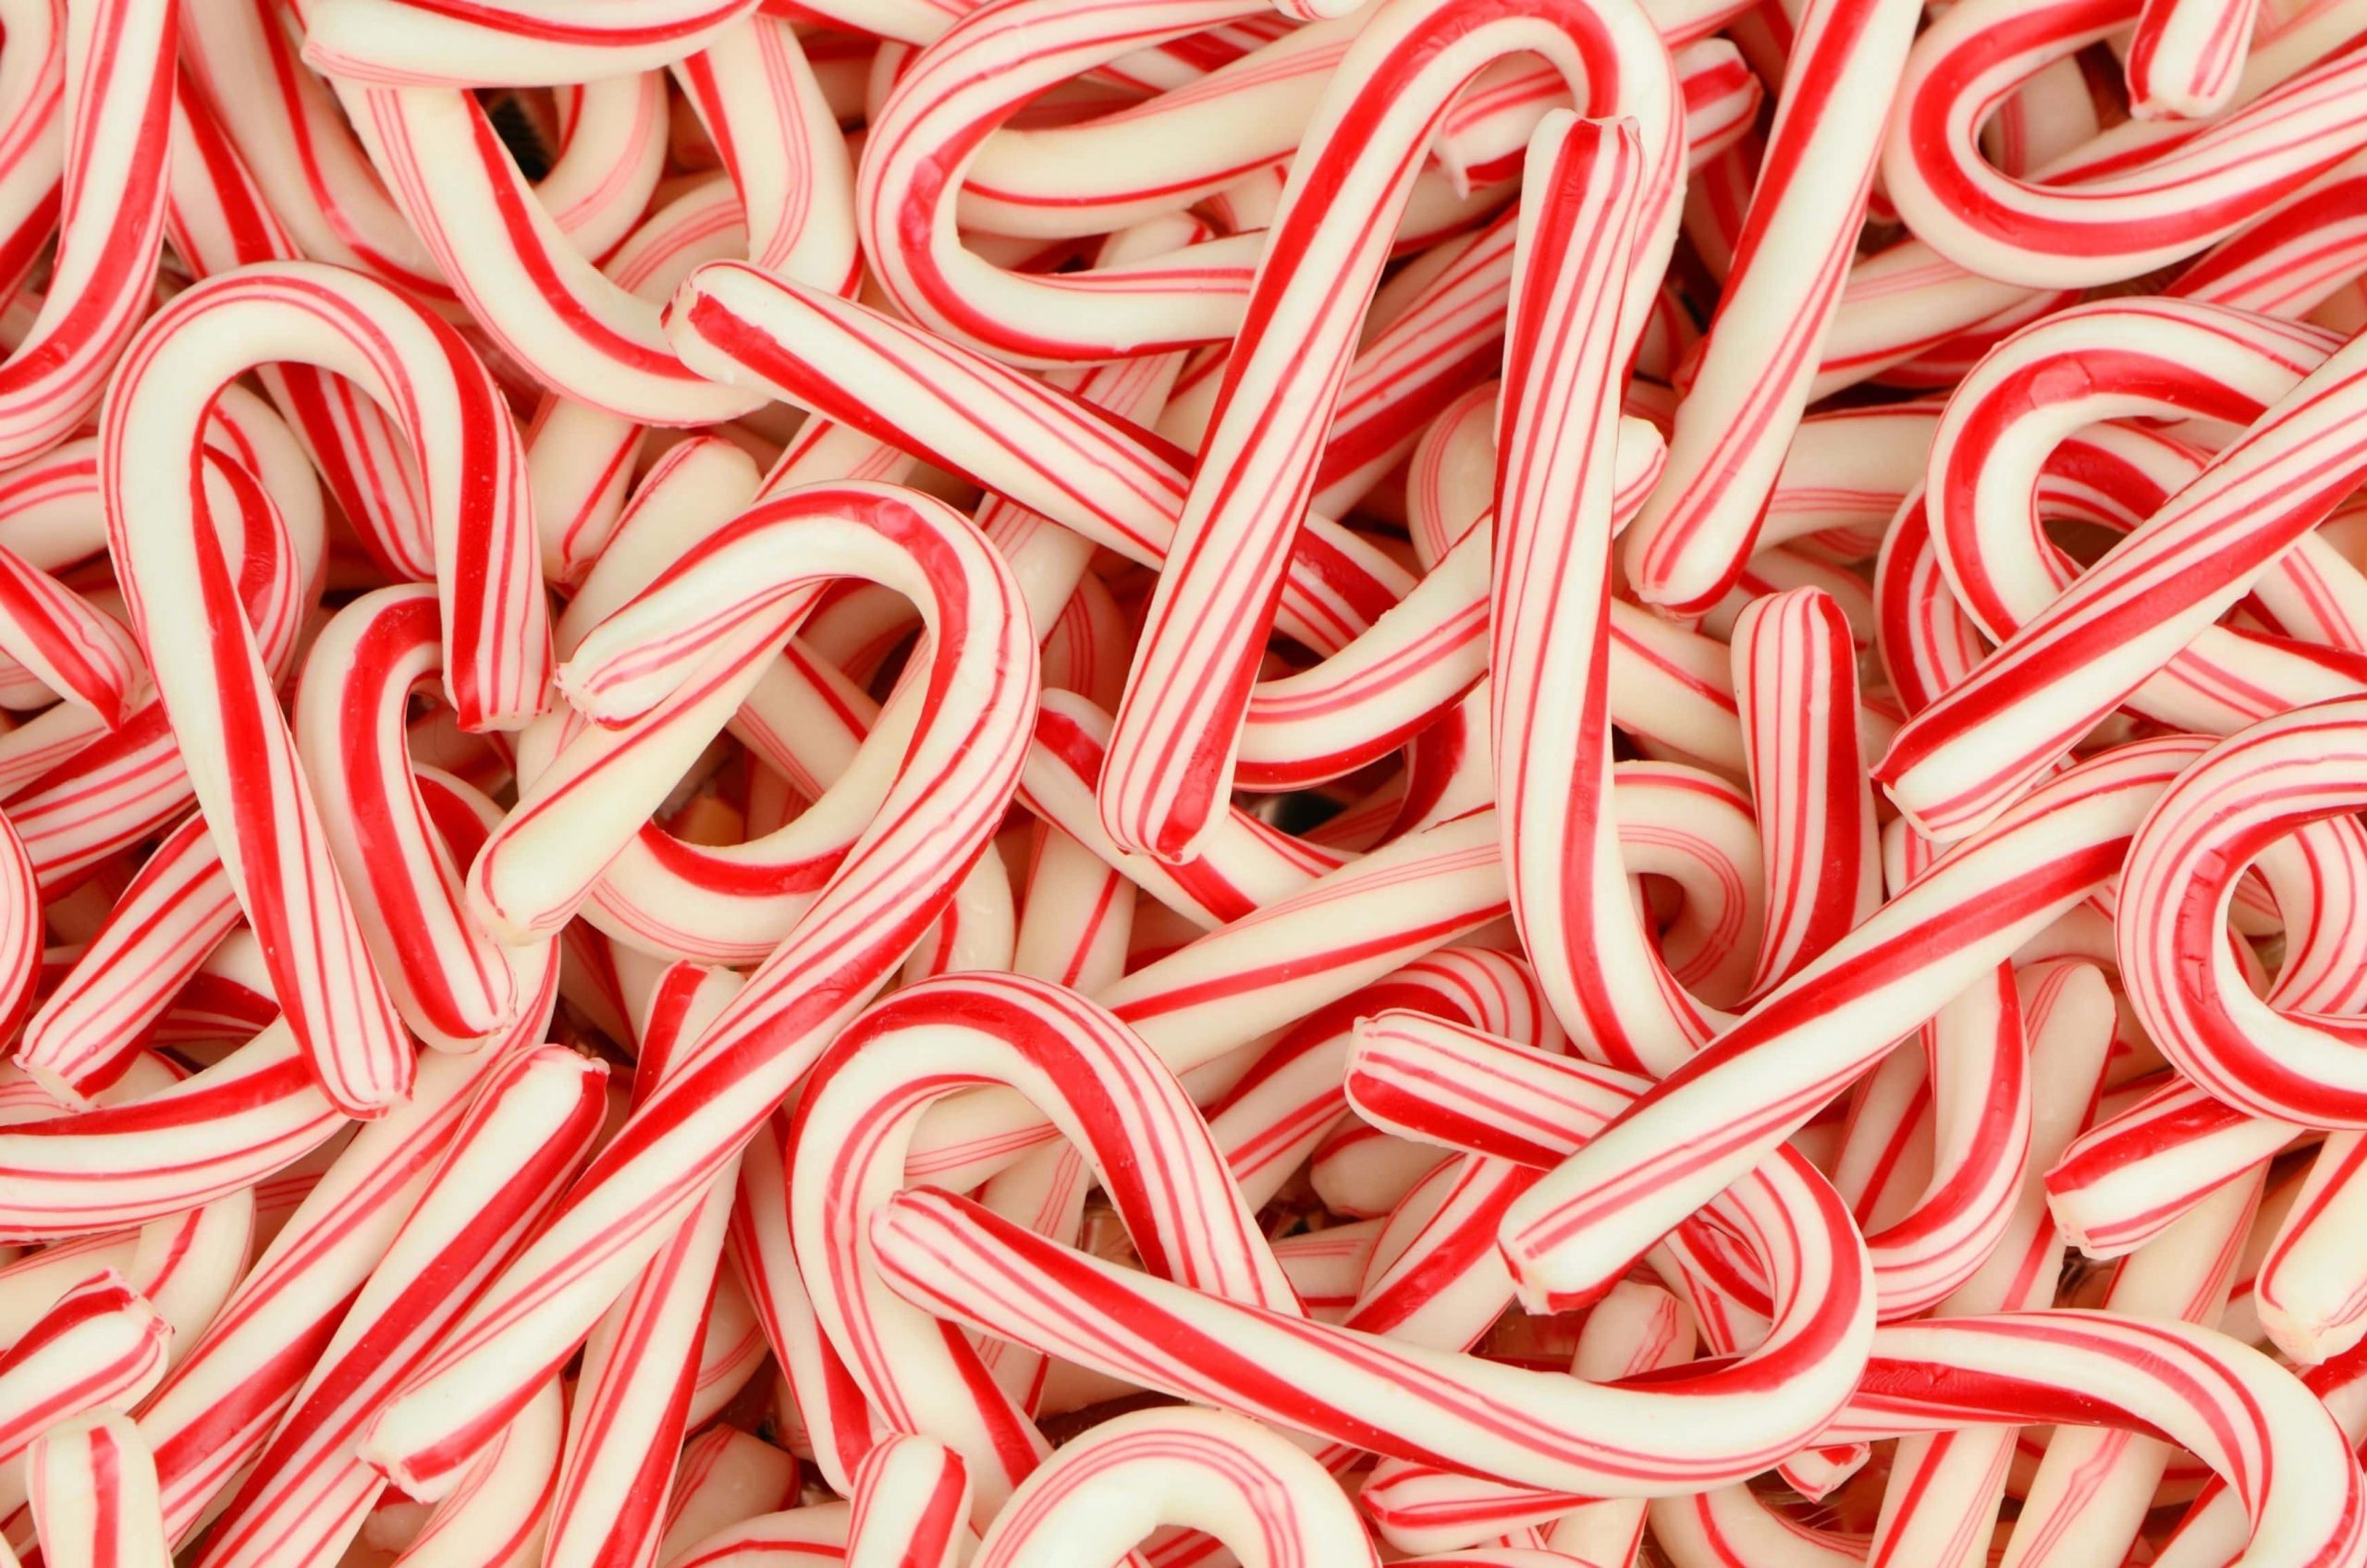 Candy cane wallpaper, Sweet treat, Festive background, Holiday delight, 2560x1700 HD Desktop